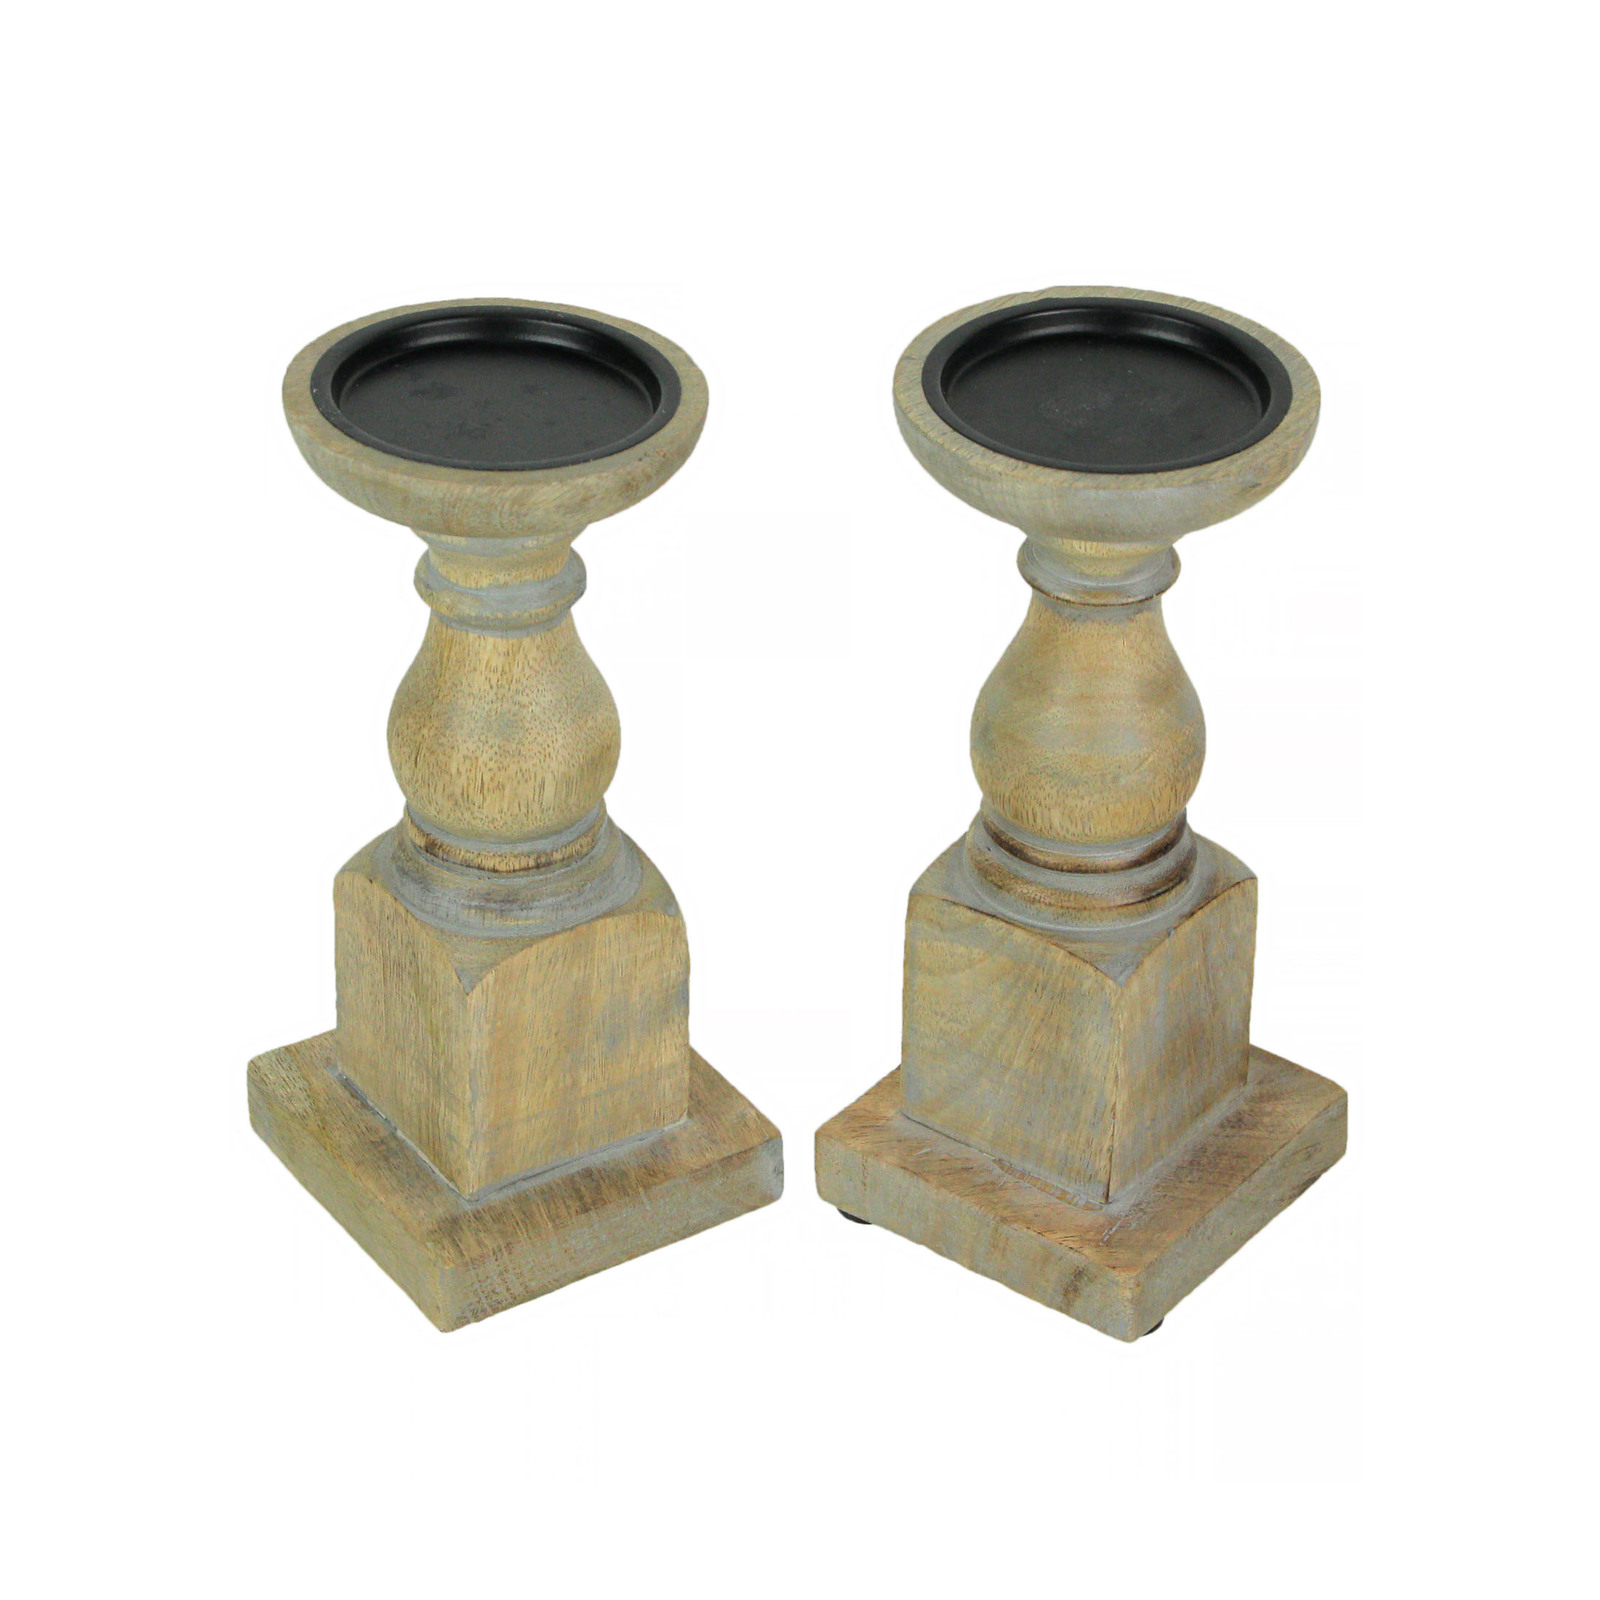 Set of 2 Wooden Pedestal Candle Holders Rustic Centerpiece Home Decor - $38.52 - $49.00